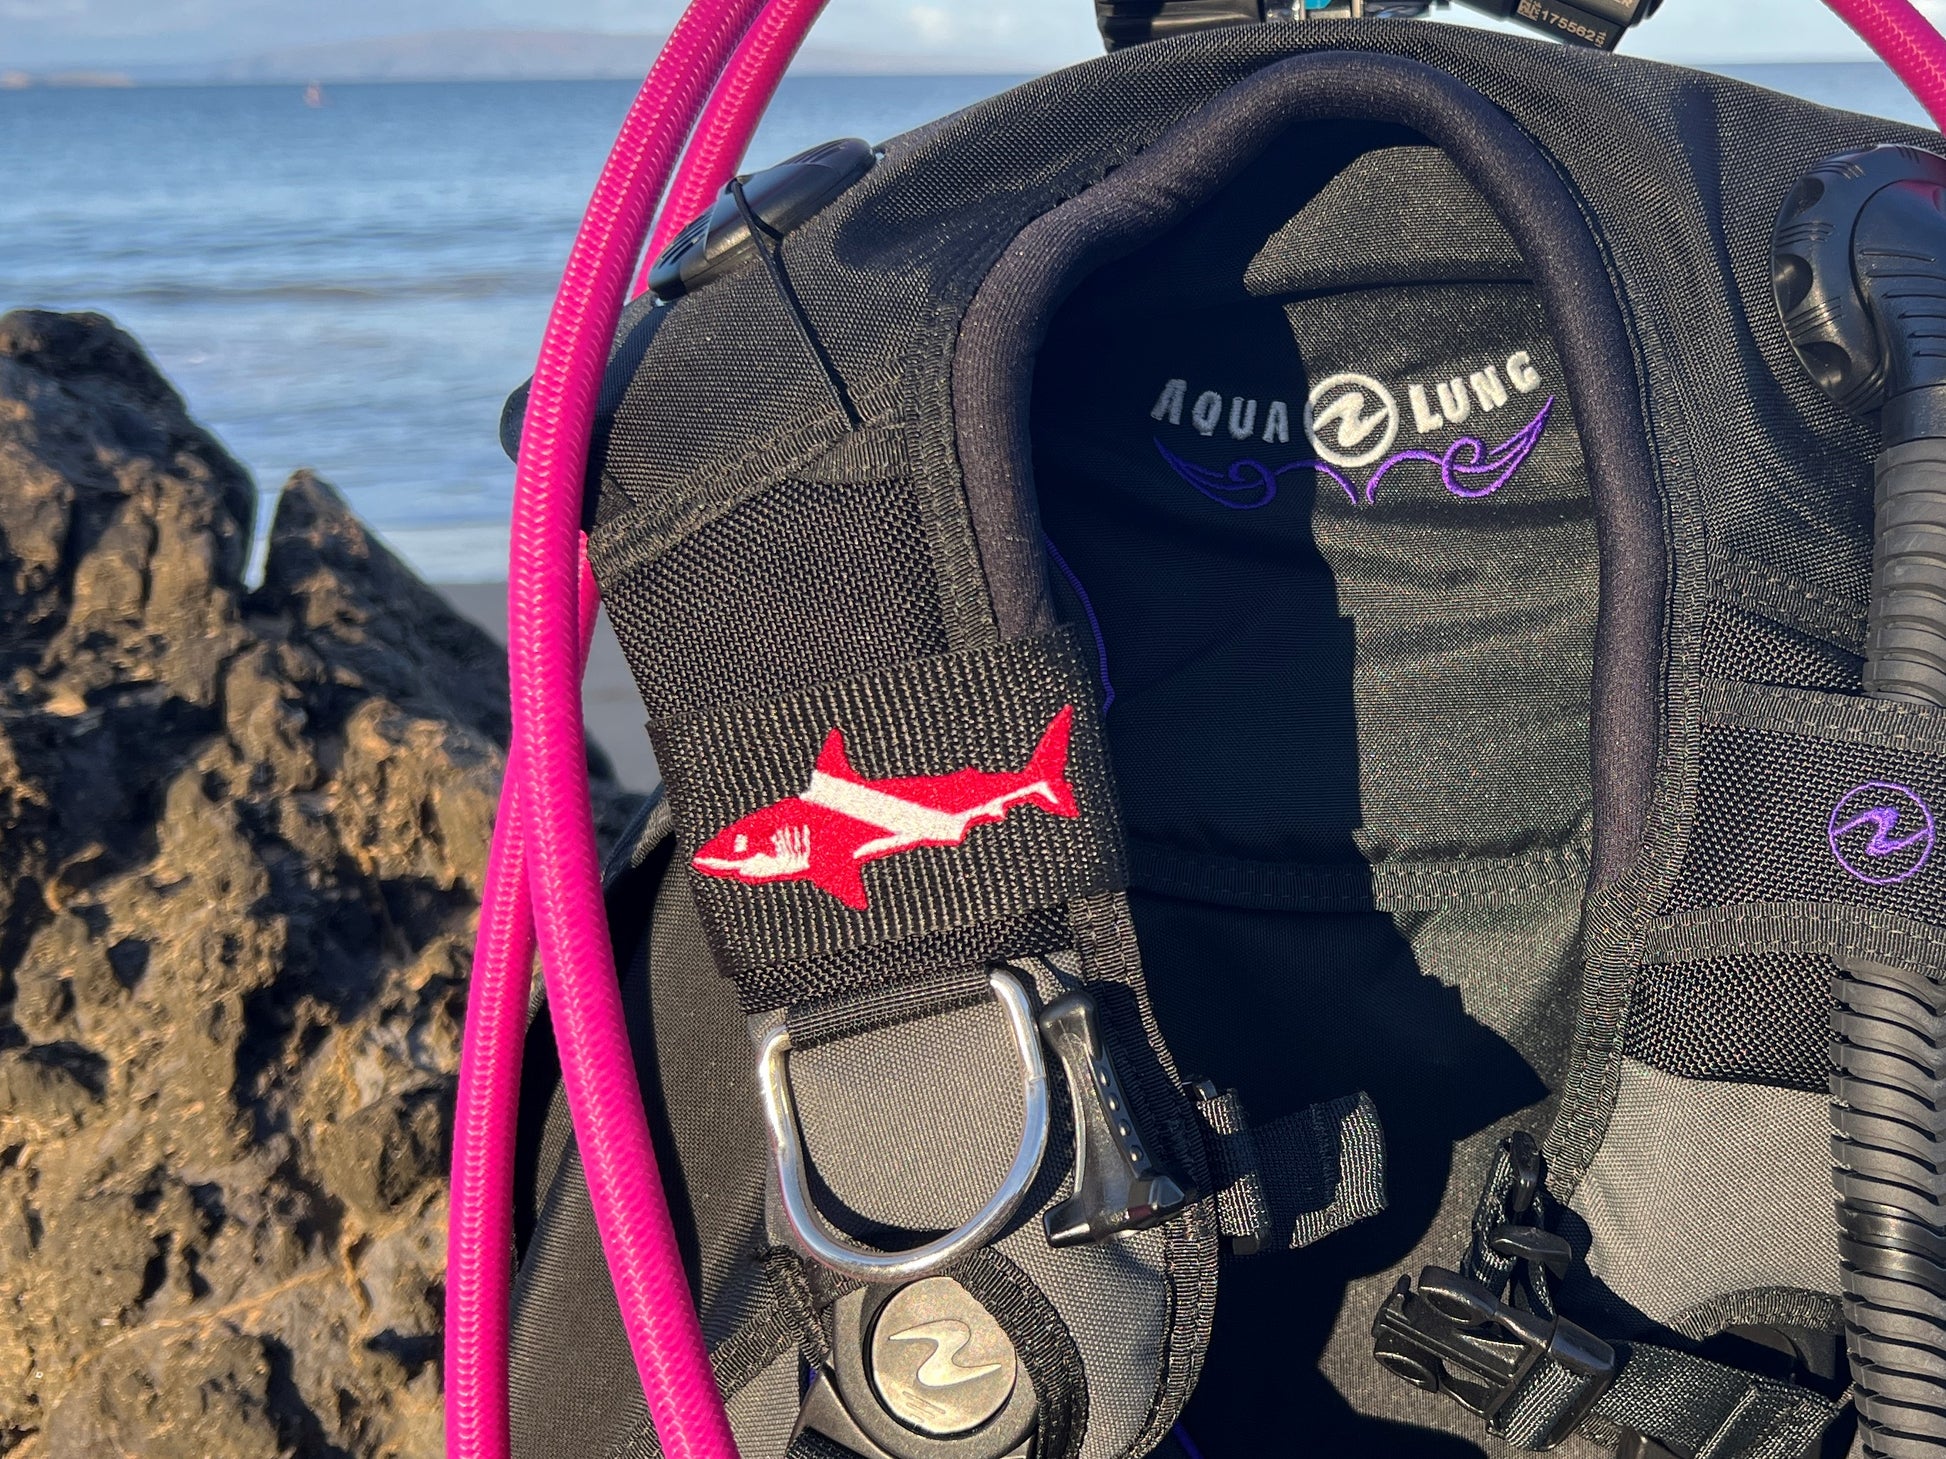 Dive Flag Shark Scuba Diver BCD Identification Tag | Scuba Diver Gift | Made on Maui by Rinn Stitches Creative & Unique Embroidery